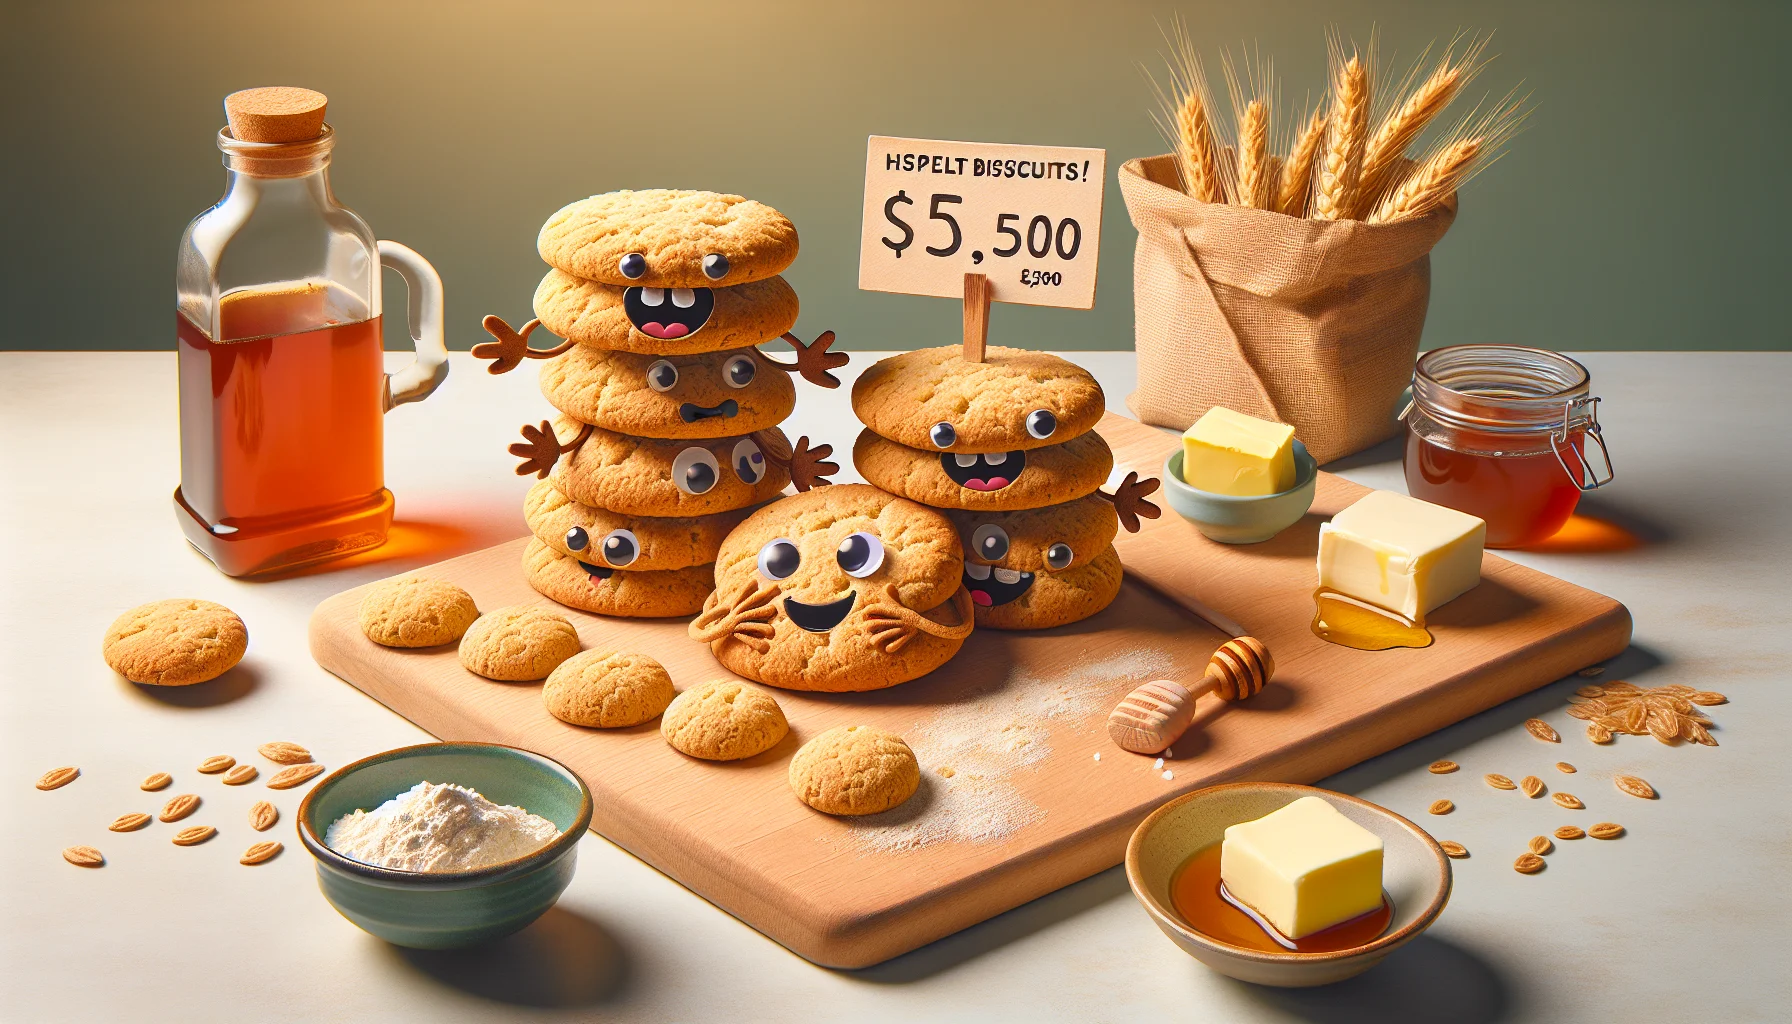 Craft an engaging and humorous scene reflecting the concept of a Homemade Spelt Biscuit recipe. Visualize a group of animated biscuits with facial expressions indicating desire to be eaten. They are placed on a clean kitchen countertop surrounded by affordable ingredients like spelt flour, butter, honey, and a pinch of salt. A price tag showing a smaller cost than usual is added, emphasizing the benefit of cost-effective healthy eating. The color palette should be warm, inviting and quite realistic.